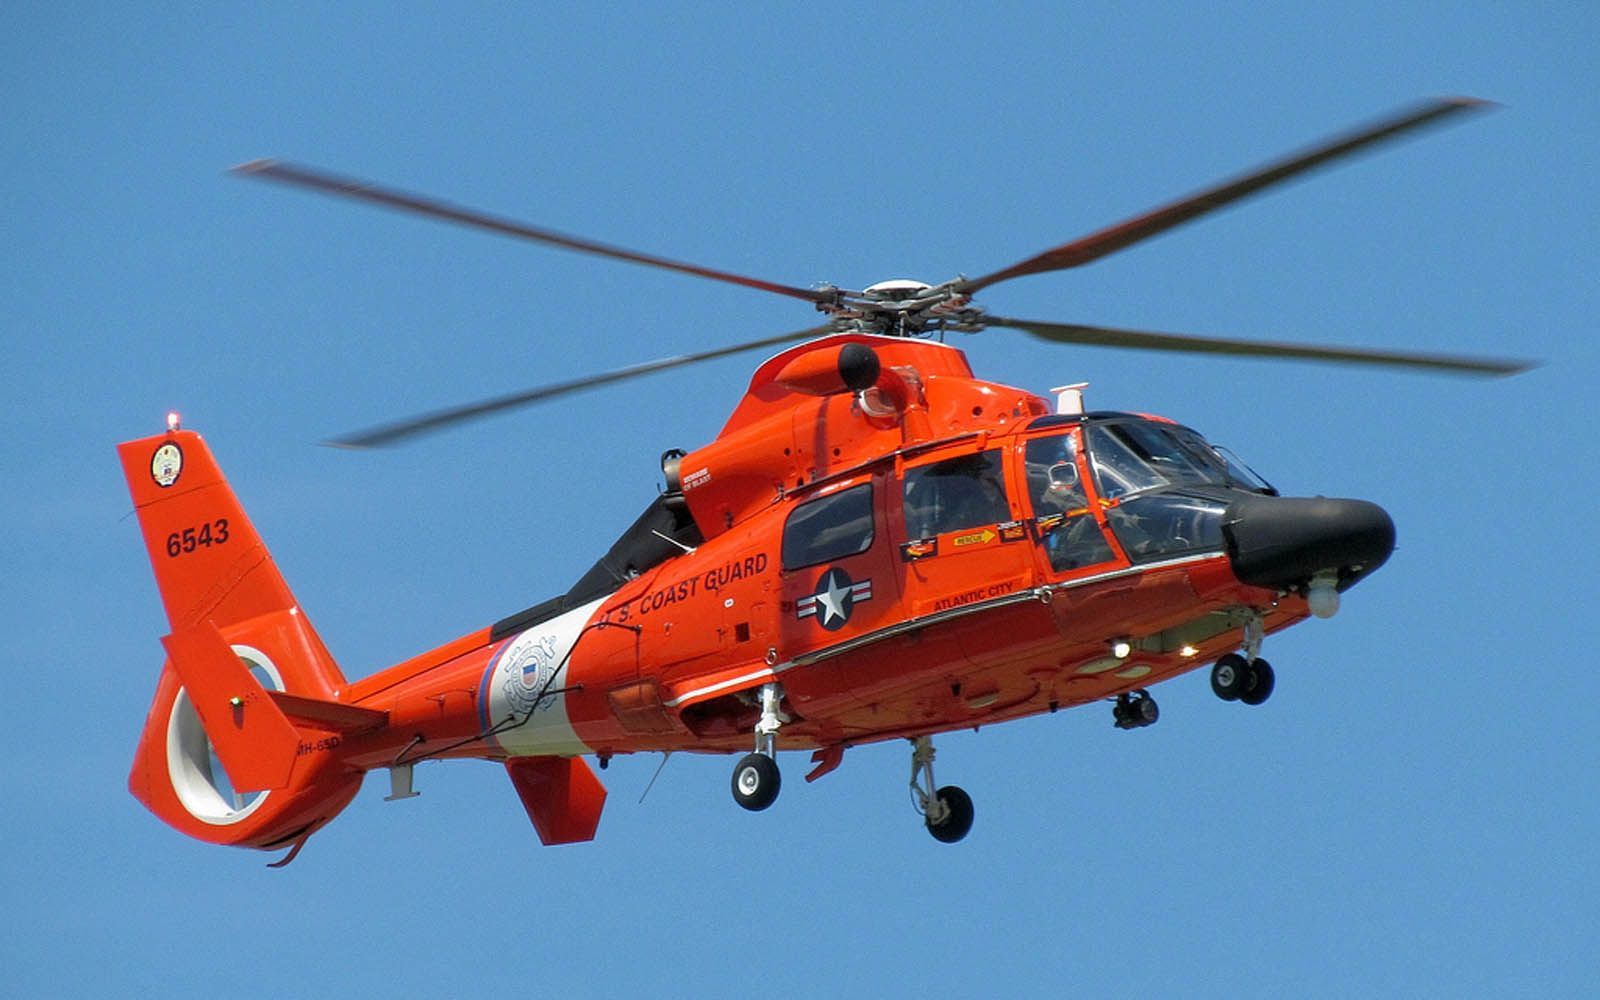 HH 65 Dolphin US Coast Guard Helicopter Wallpaper. Coast guard helicopter, Us coast guard, Coast guard